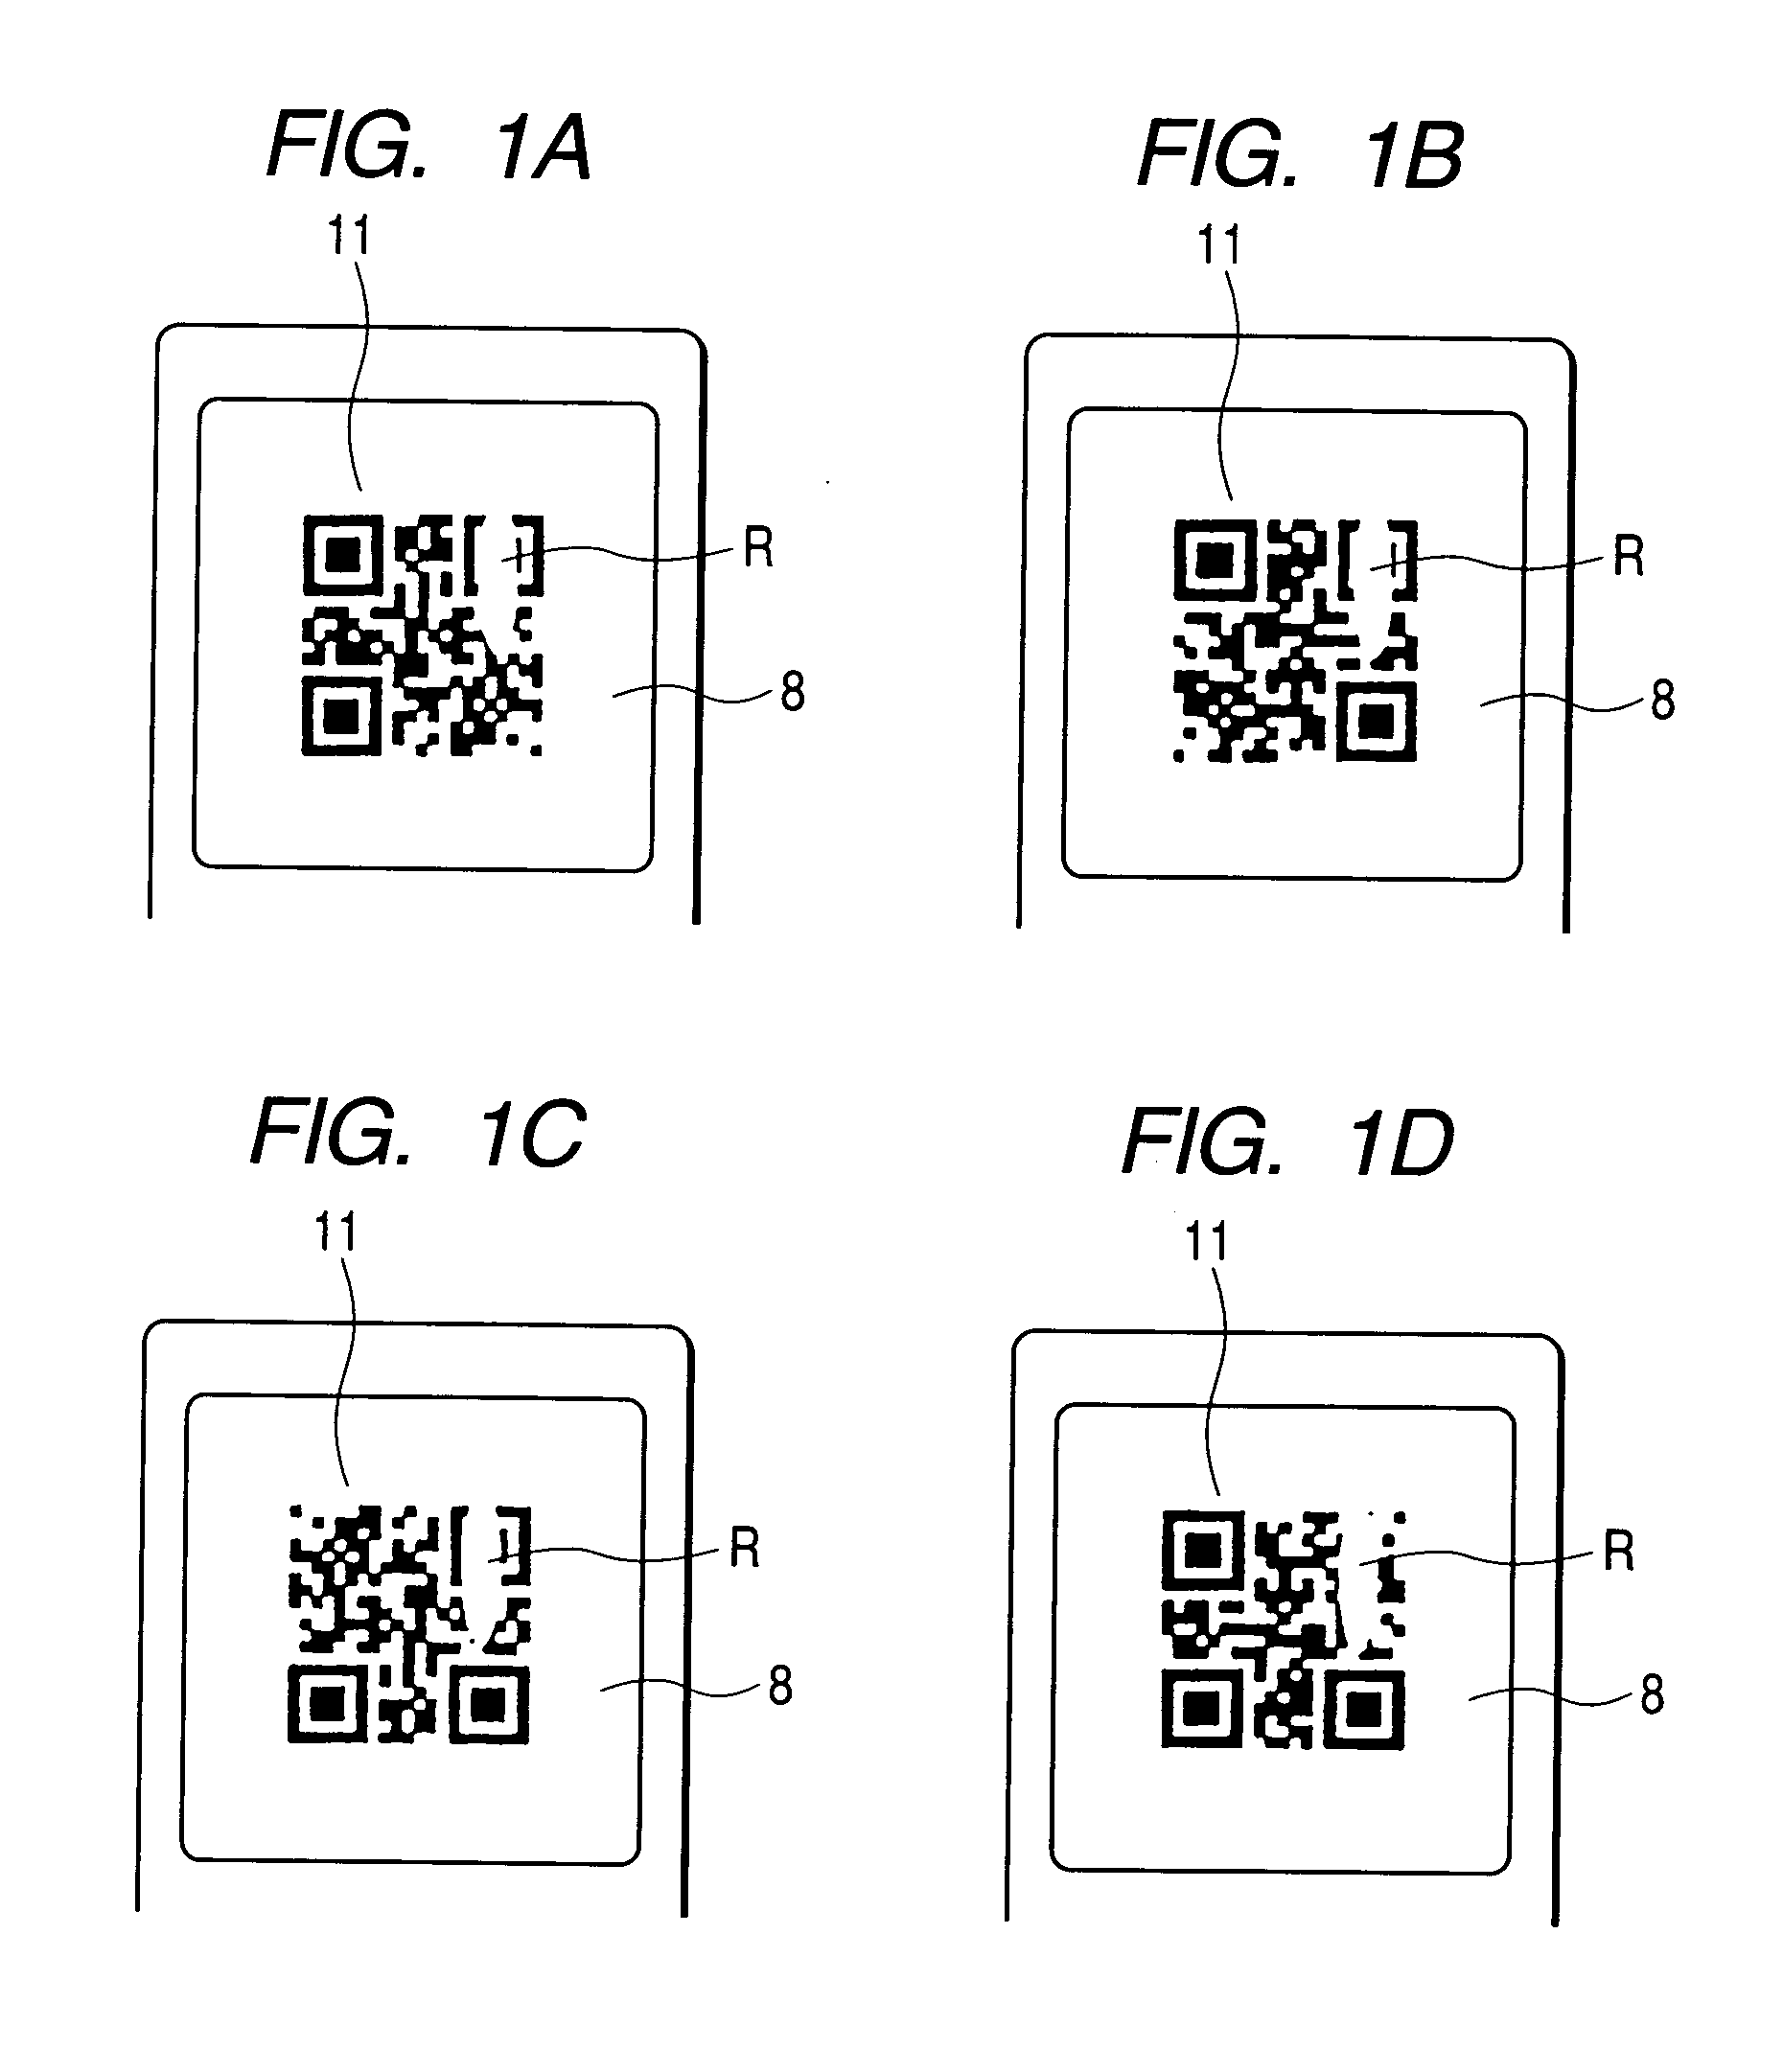 Method for displaying and reading information code for commercial transaction